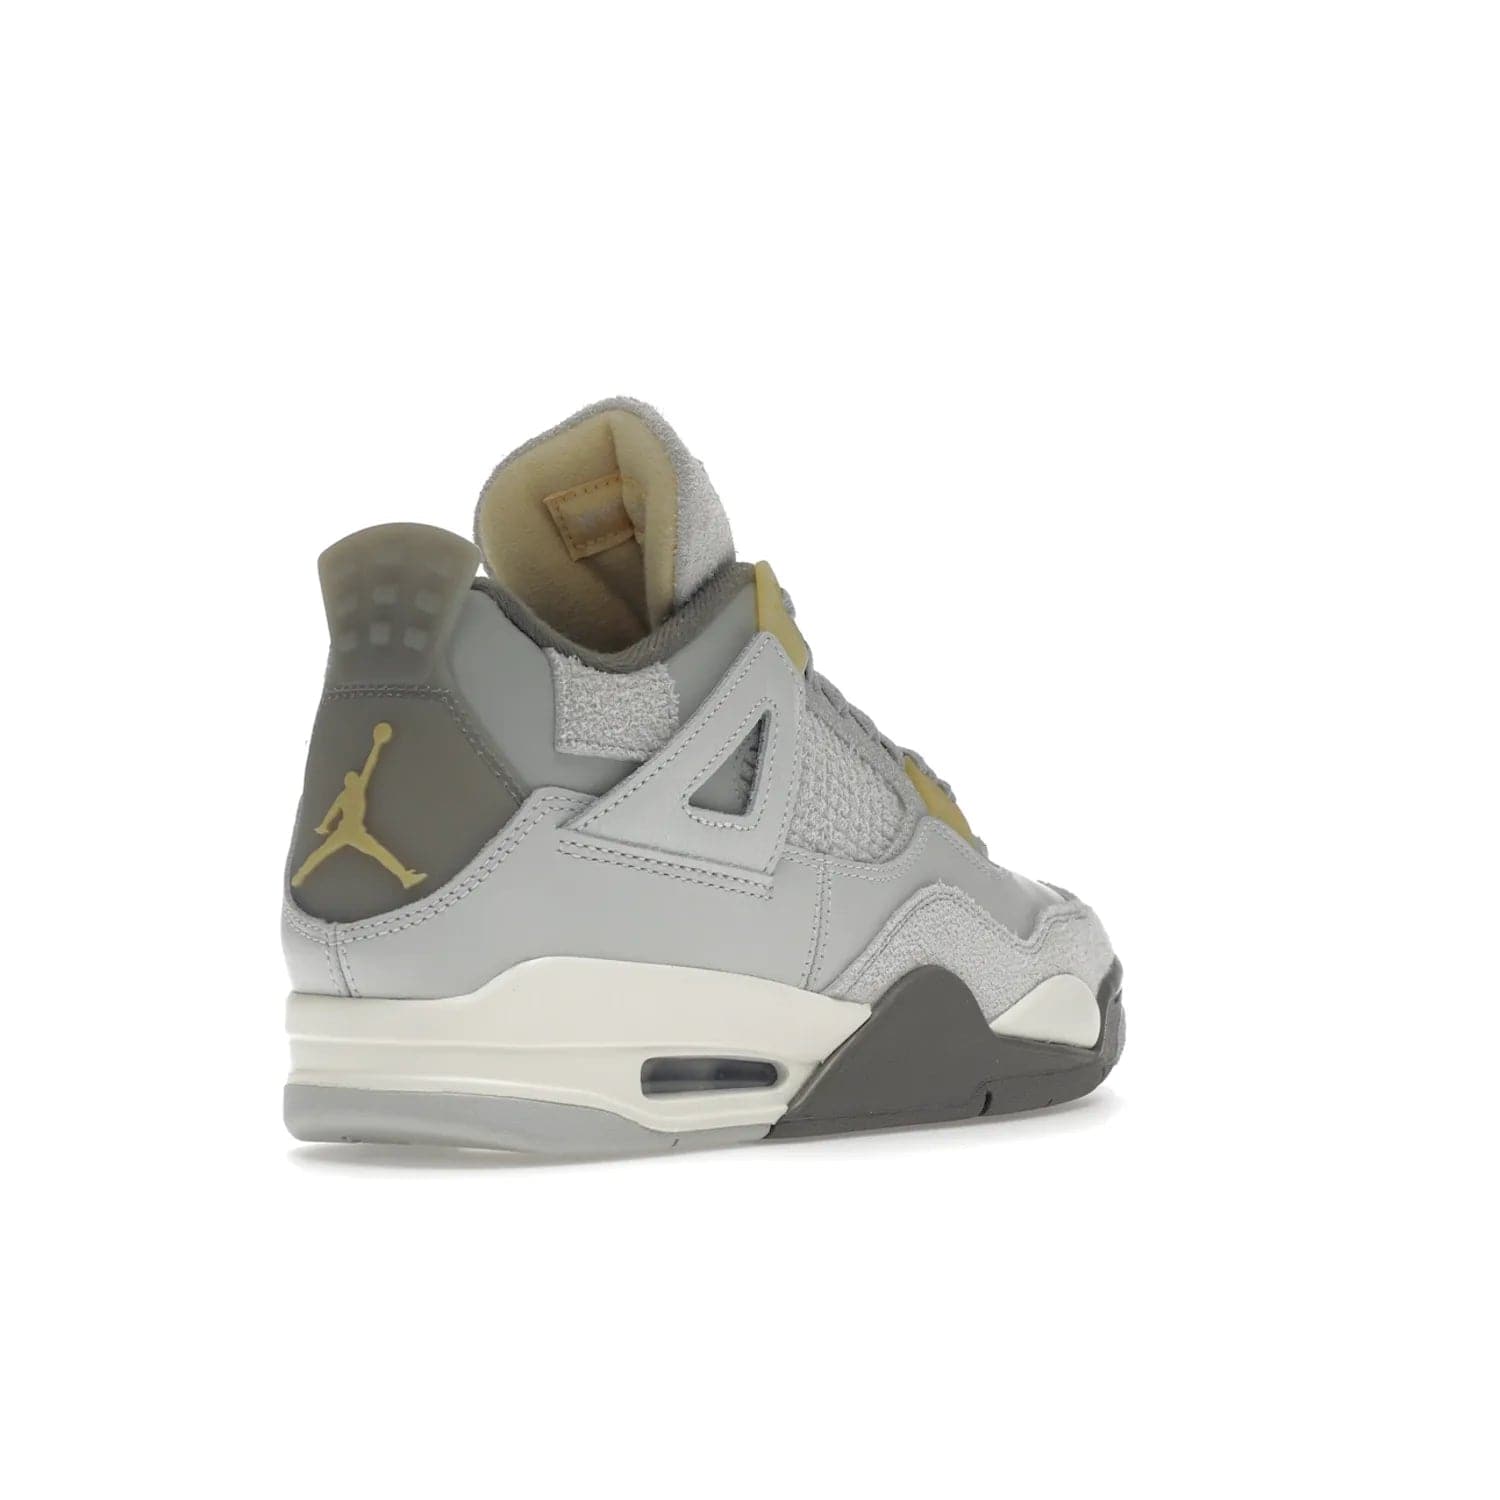 Jordan 4 Retro SE Craft Photon Dust - Image 32 - Only at www.BallersClubKickz.com - Upgrade your shoe collection with the Air Jordan 4 Retro SE Craft Photon Dust. This luxurious sneaker features a combination of suede and leather with unique grey tones like Photon Dust, Pale Vanilla, Off White, Grey Fog, Flat Pewter, and Sail. Available February 11, 2023.